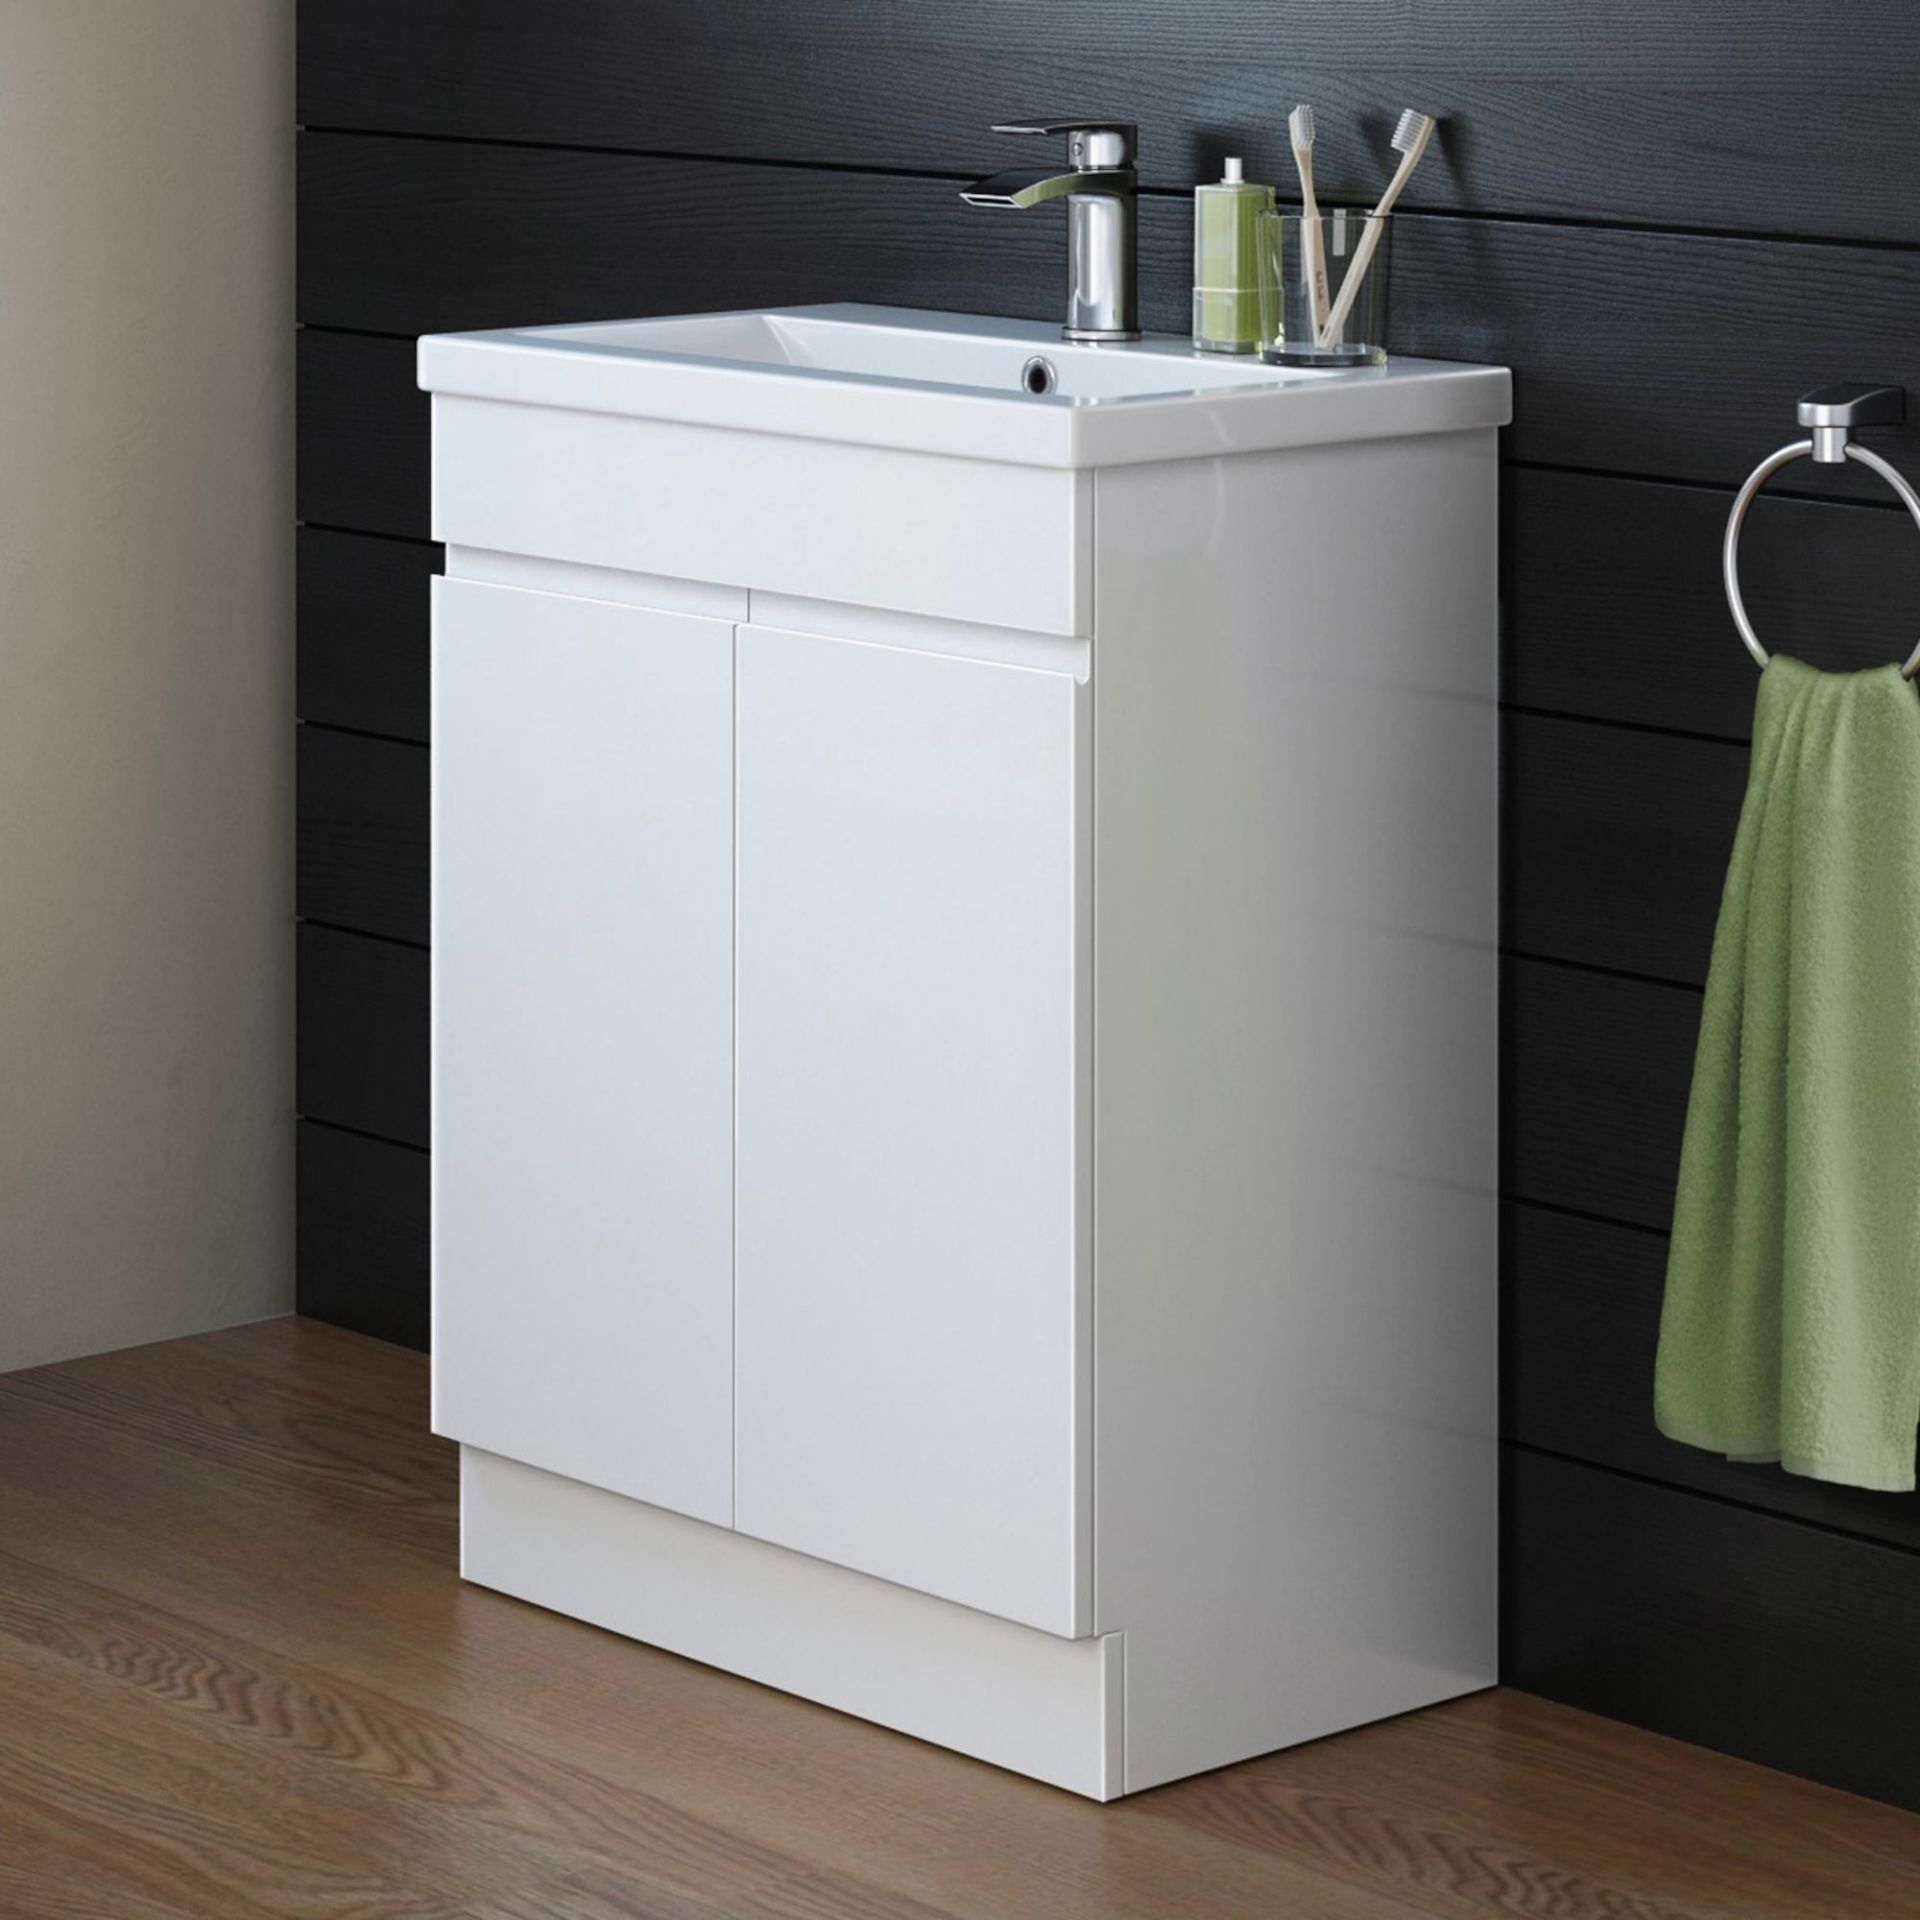 Brand New 600mm Trent Gloss White Sink Cabinet - Floor Standing.RRP £499.99. Comes complete with bas